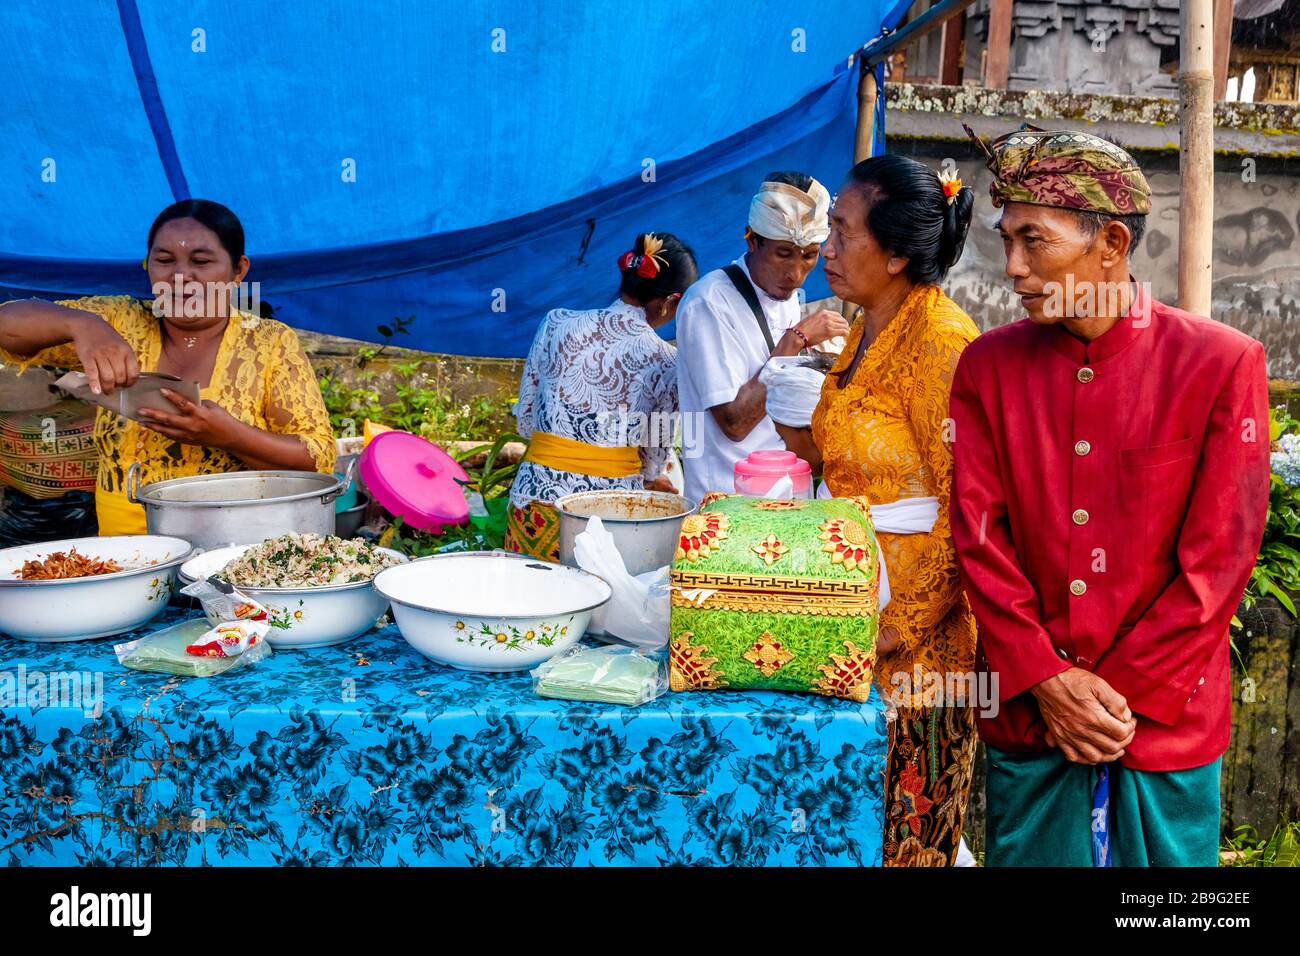 A Group Of Balinese Hindu People In Traditional Costume At A Street Food Stall During A Local Religious Festival, Ubud, Bali, Indonesia. Stock Photo